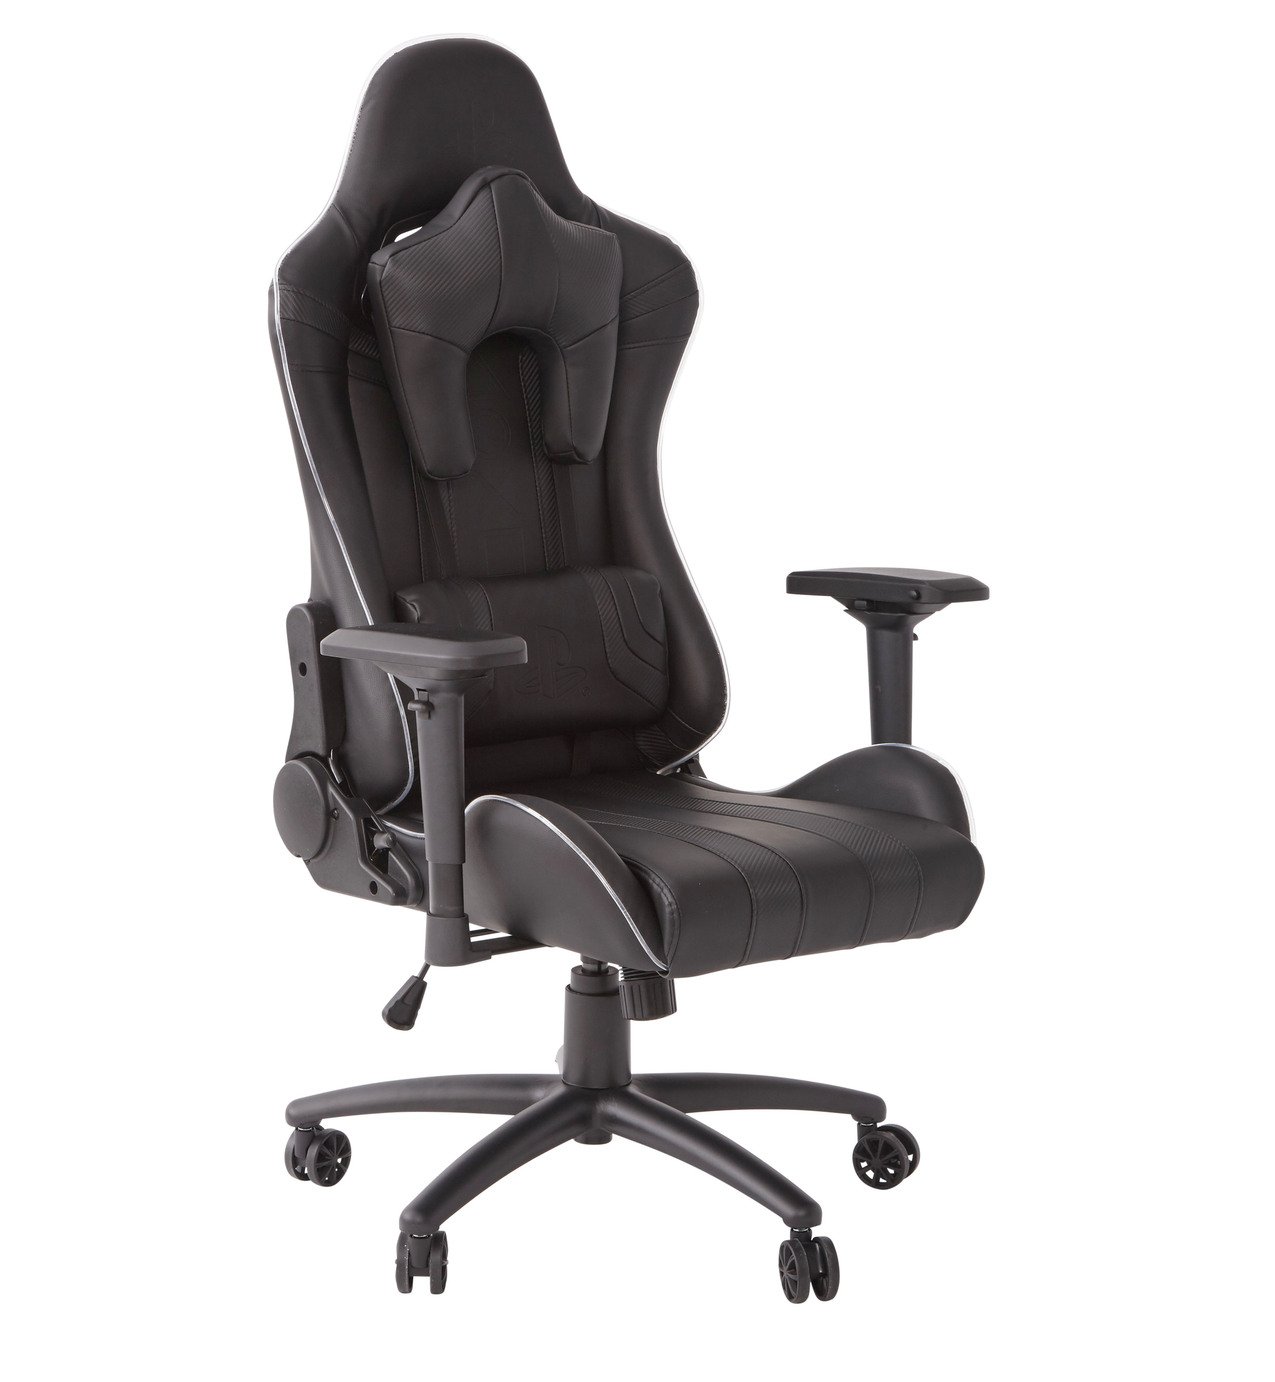 official playstation gaming chair